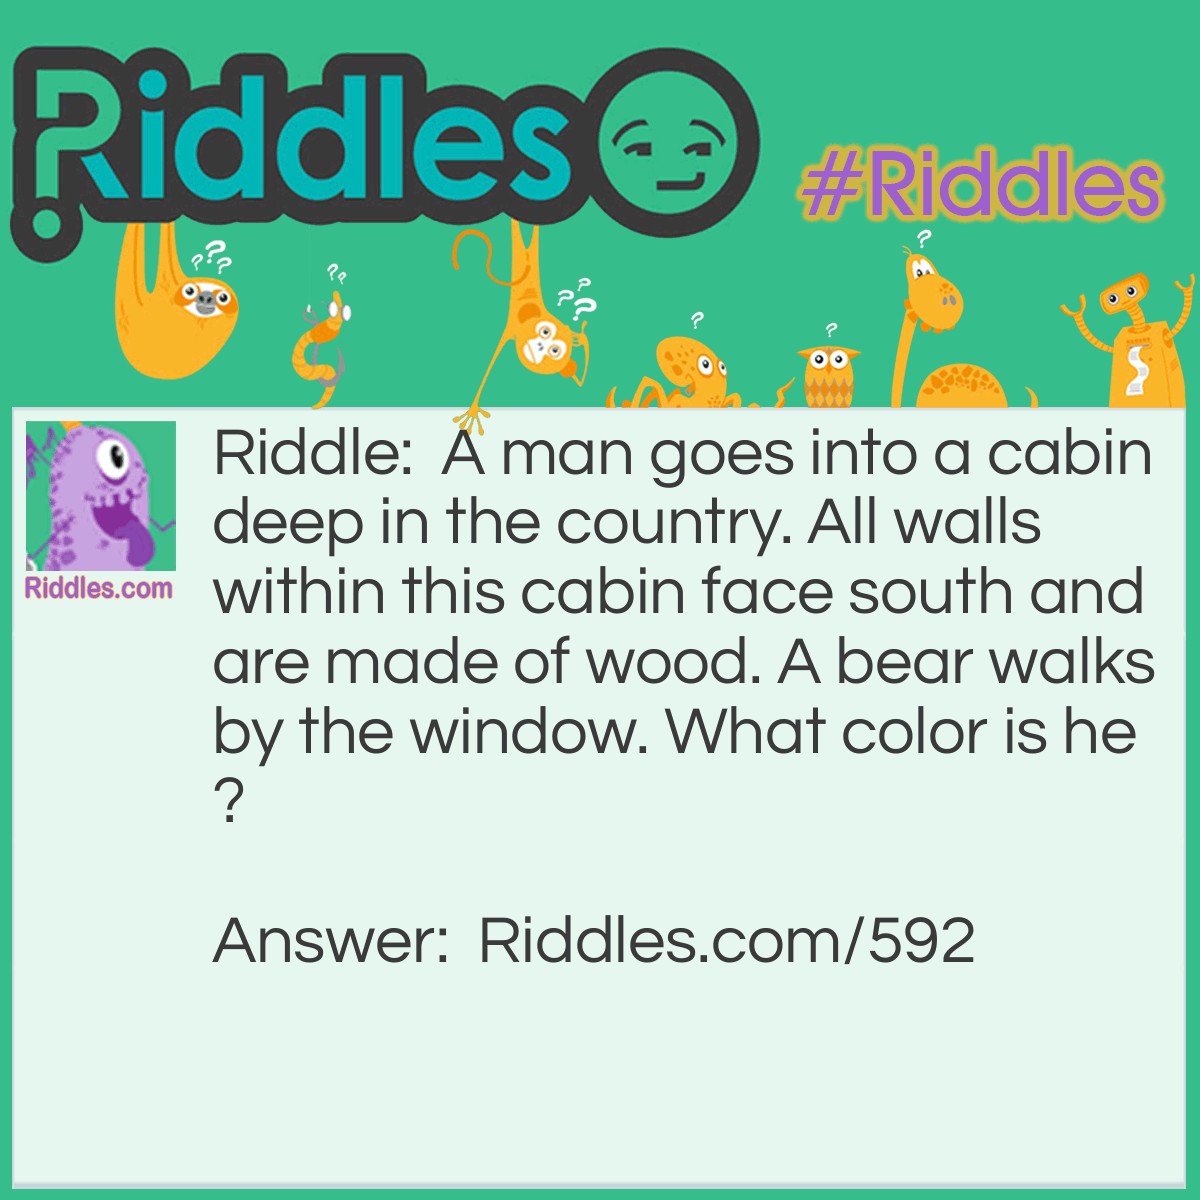 Riddle: A man goes into a cabin deep in the country. All walls within this cabin face south and are made of wood. A bear walks by the window. What color is he? Answer: Since all walls within this cabin face south, the only location on the face of the earth this is possible is the North Pole. So thus the bear is a polar bear and the color would have to be white!